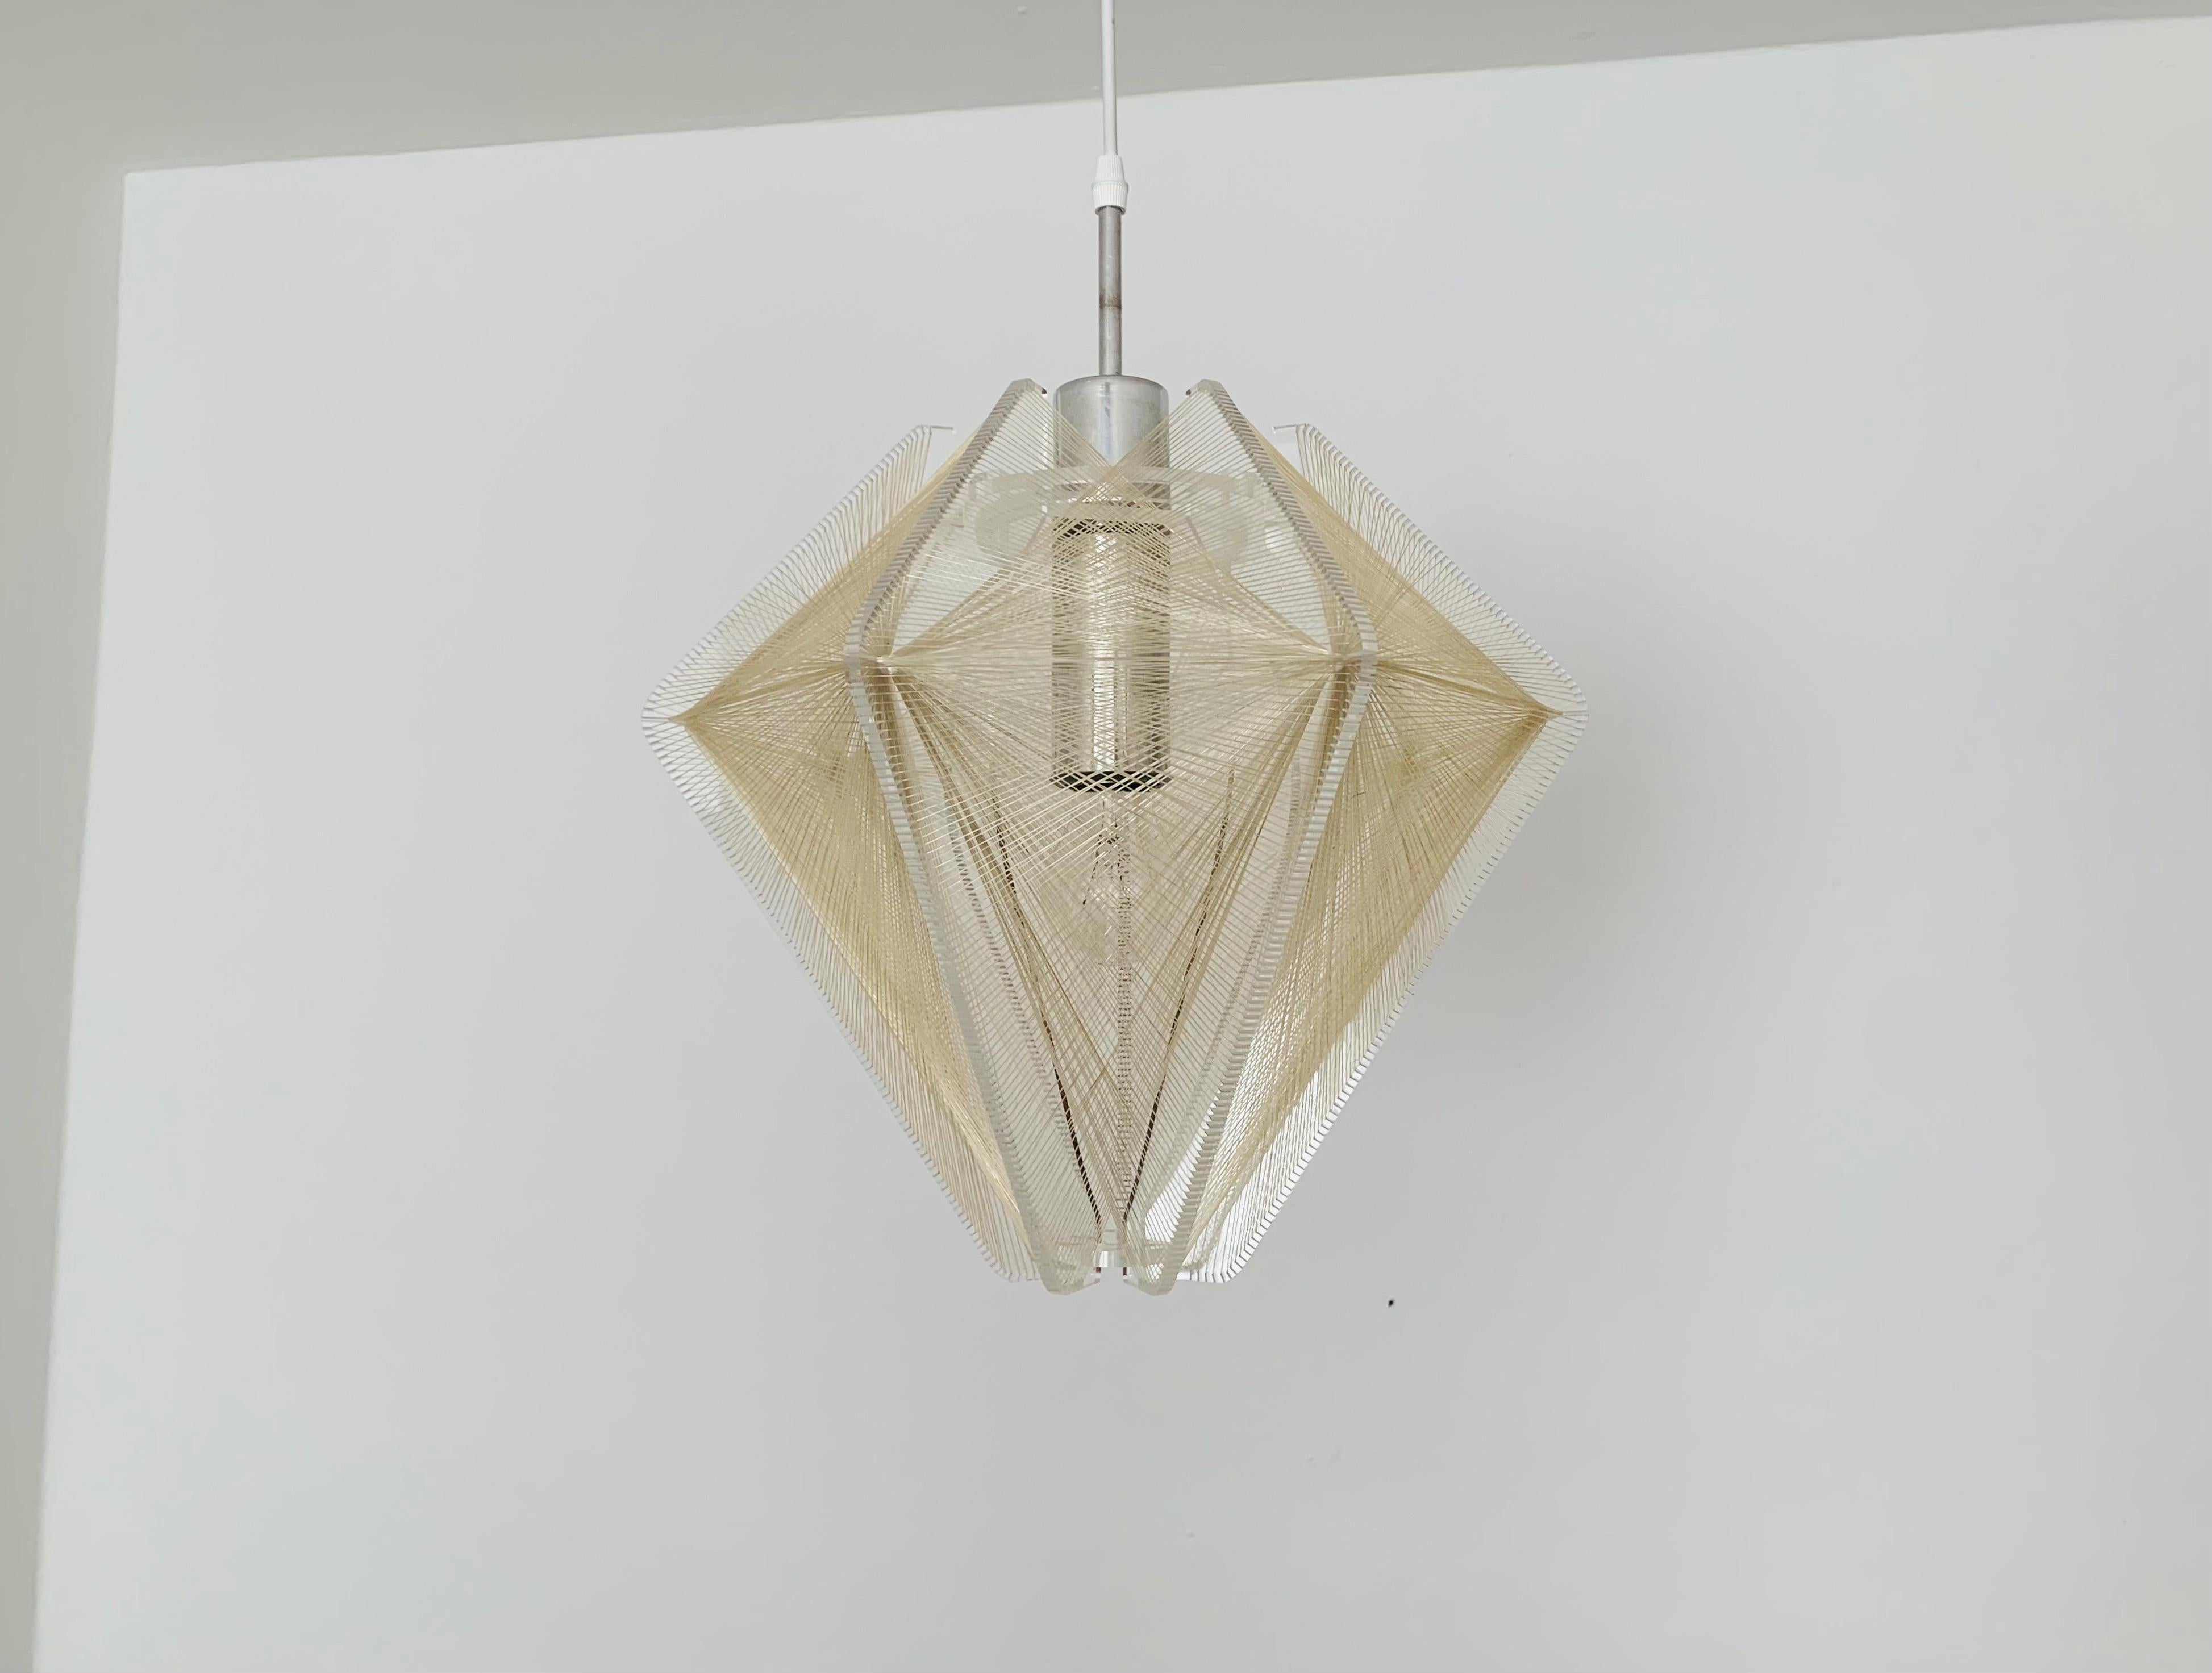 Very rare acrylic pendant lamp from the 1960s.
Exciting design and great workmanship.
The nylon threads create a very nice light atmosphere.

Design: Paul Second
Manufacturer: Sompex

Condition:

Very good vintage condition with slight